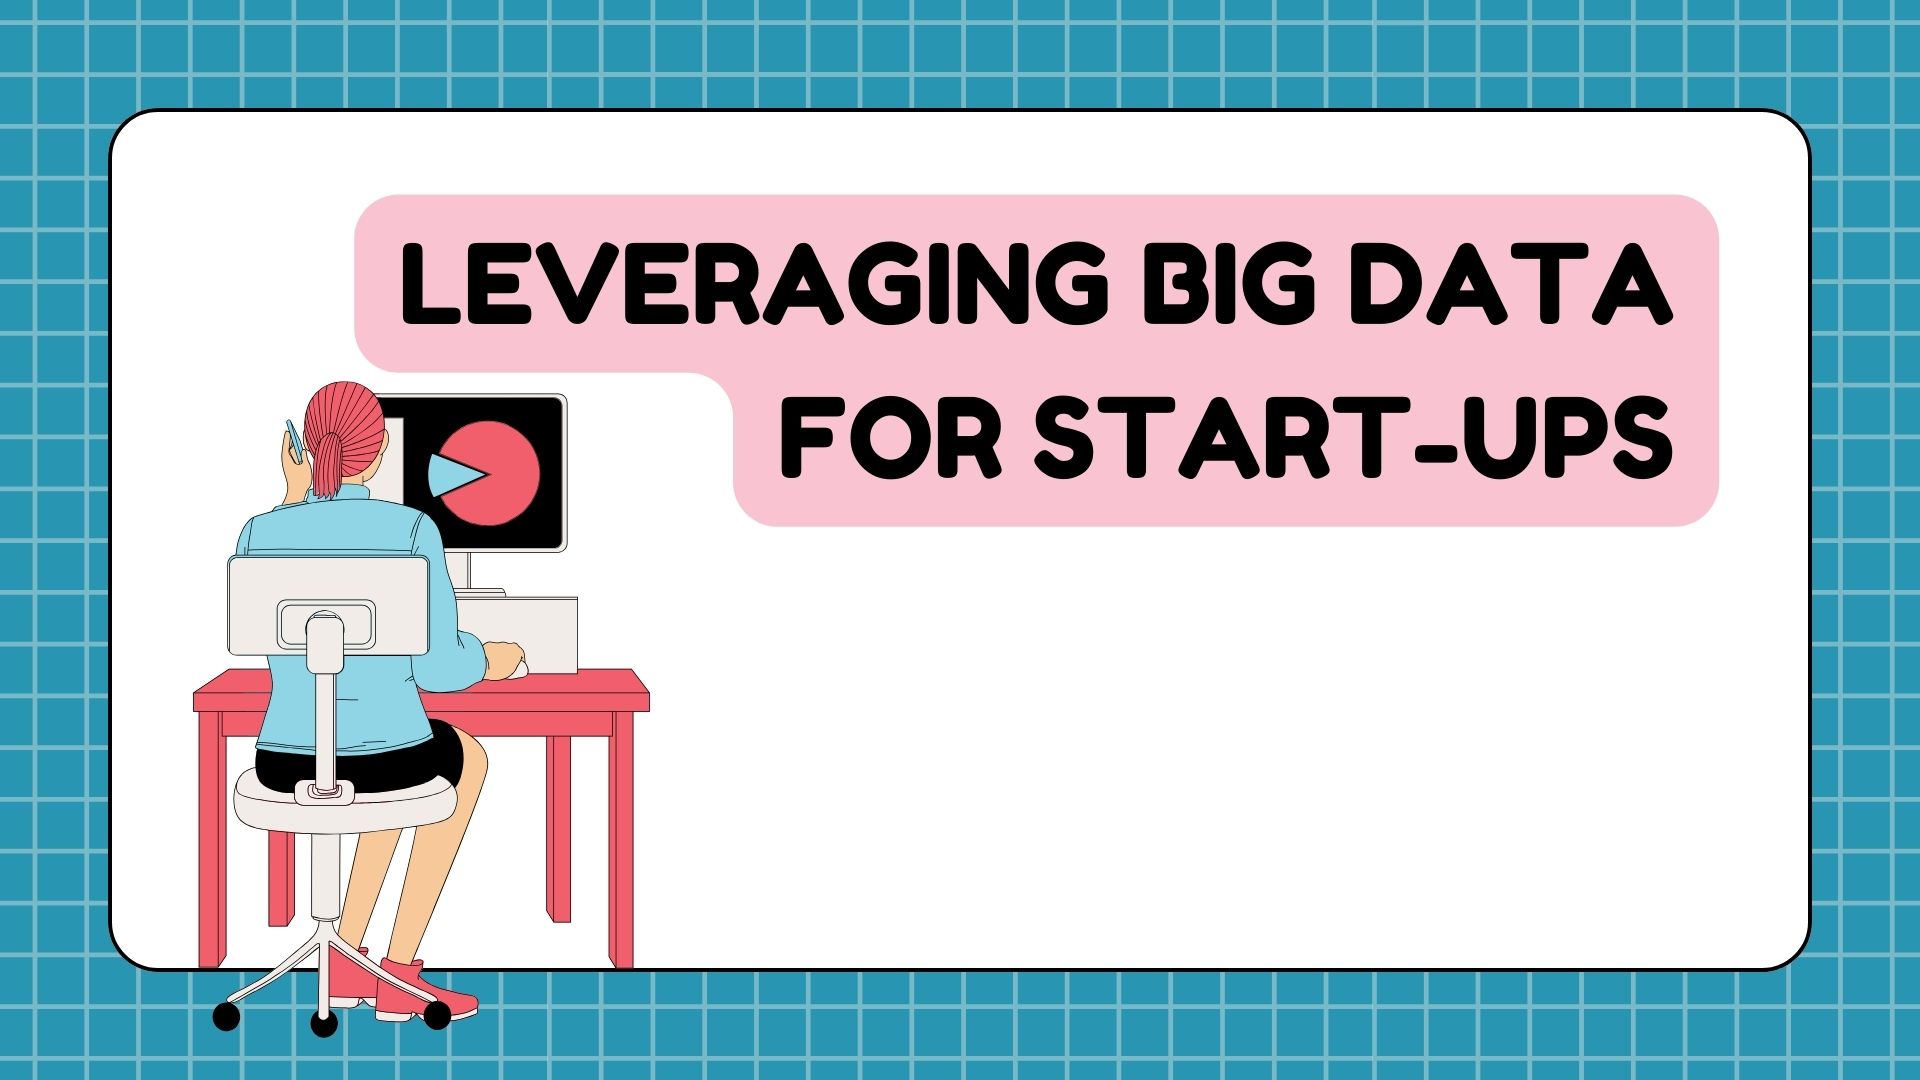 Leveraging Big Data for Academic Projects and Start-Ups